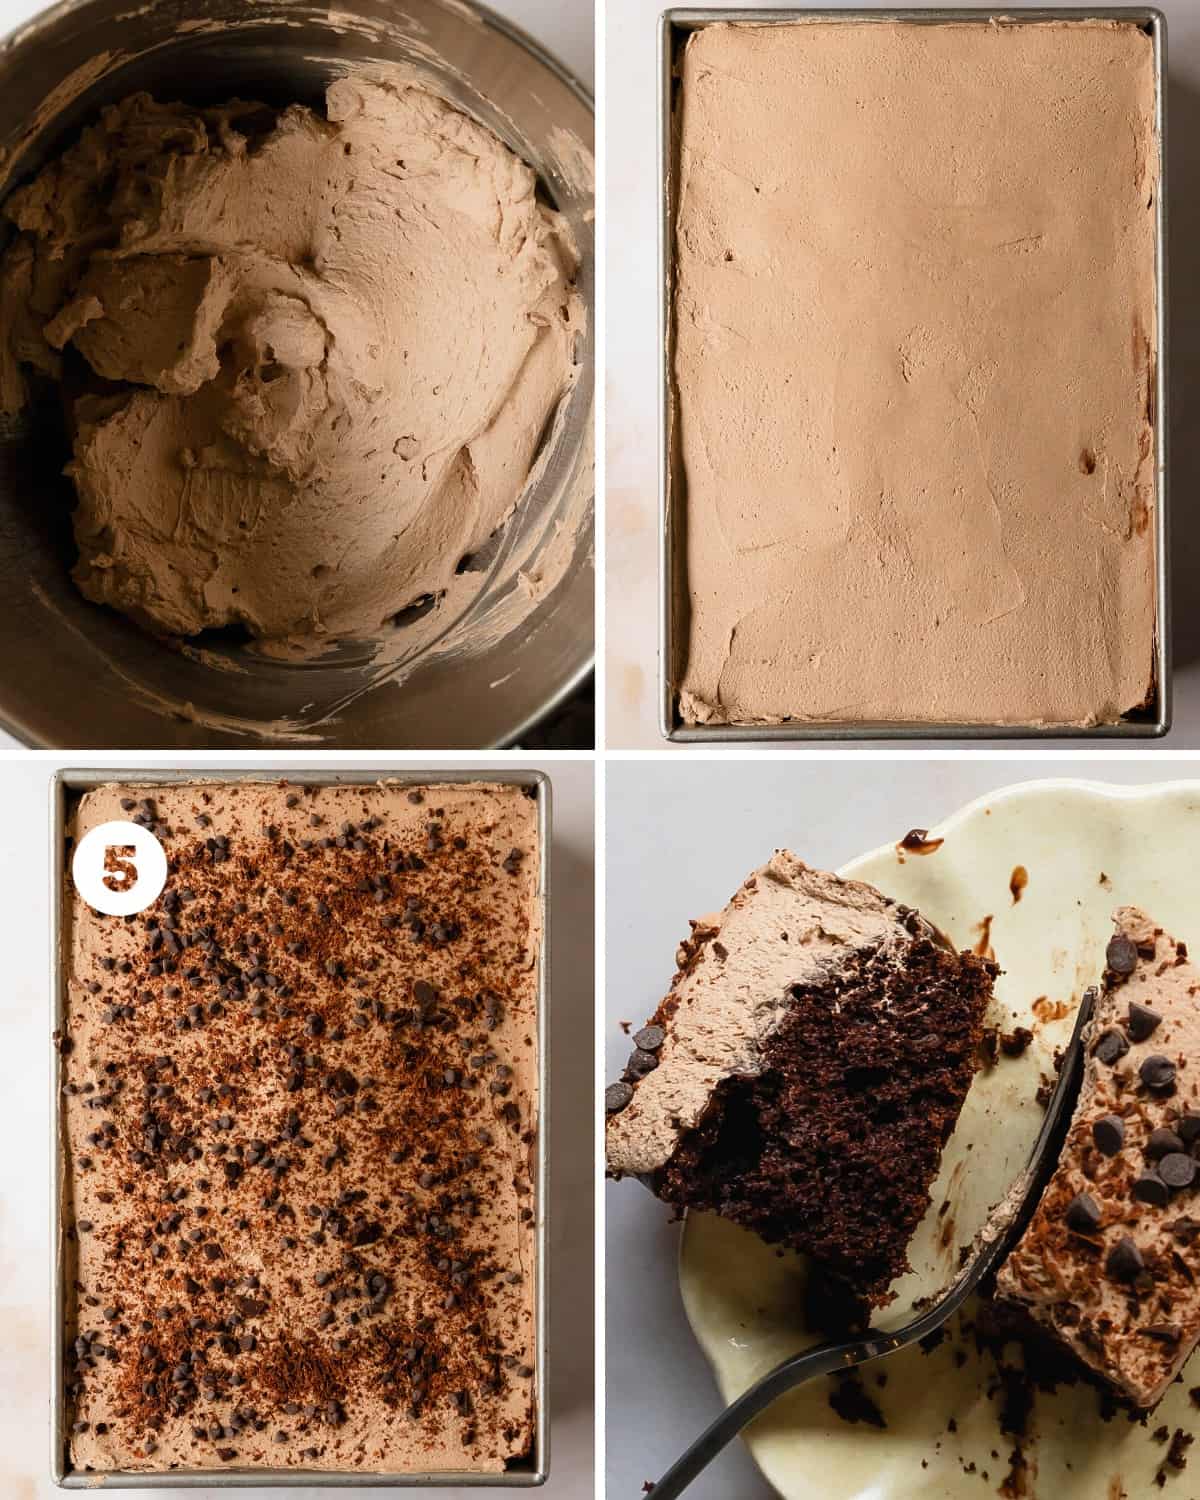 Store in the fridge until you are ready to serve the cake. Top the cake with shaved chocolate and chocolate chips, slice, serve the cake and enjoy!